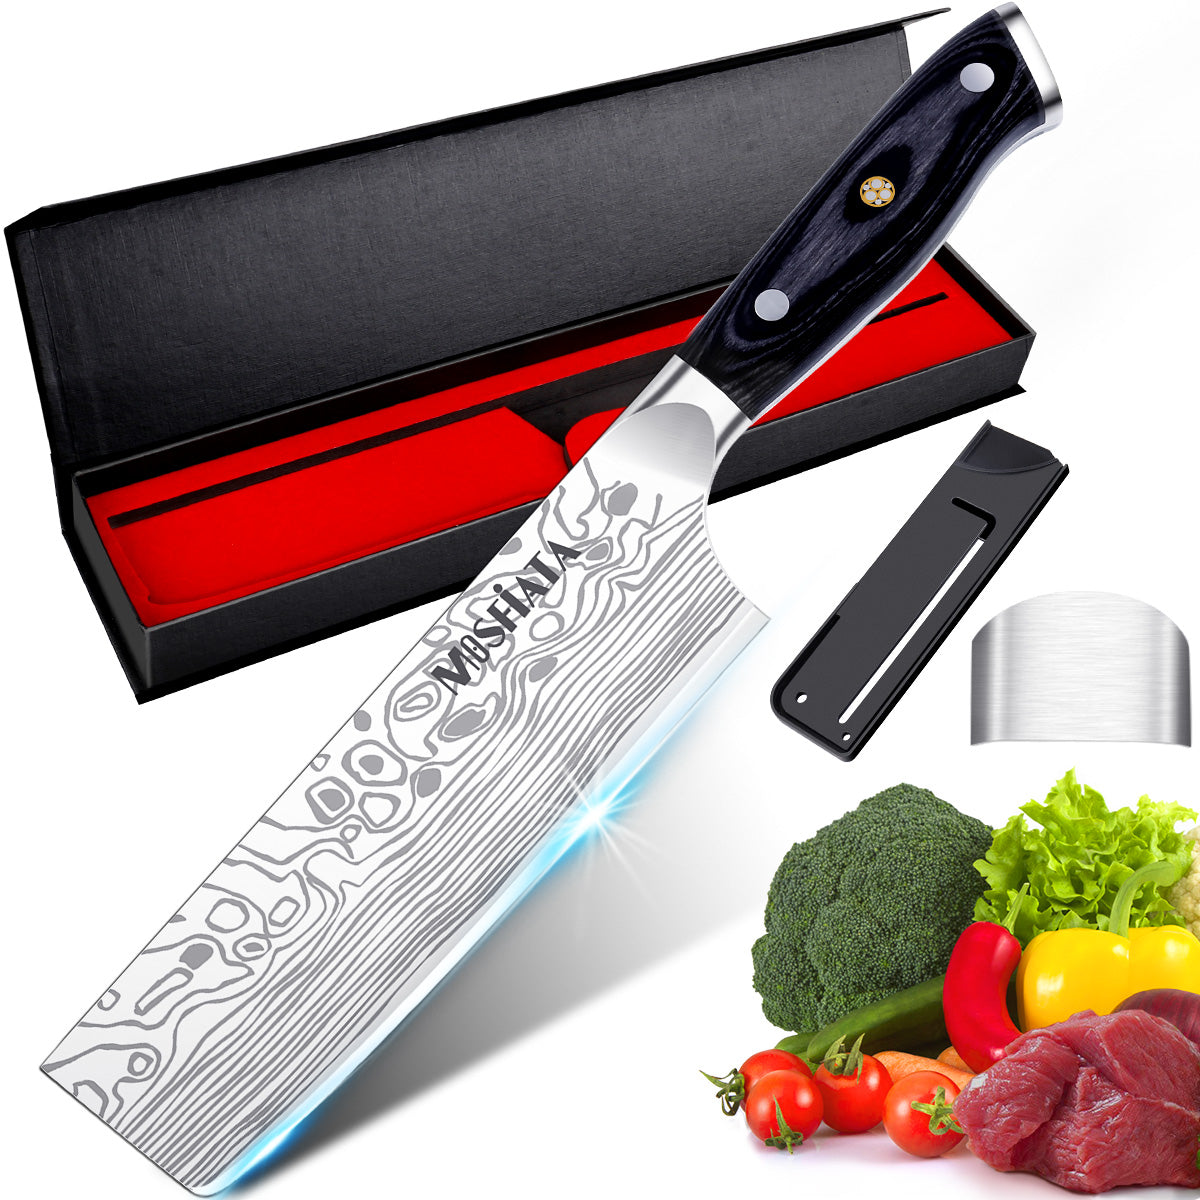 MOSFiATA 8 Super Sharp Professional Chef's Knife with Finger Guard and  Knife Sharpener, German High Carbon Stainless Steel EN1.4116 with Micarta